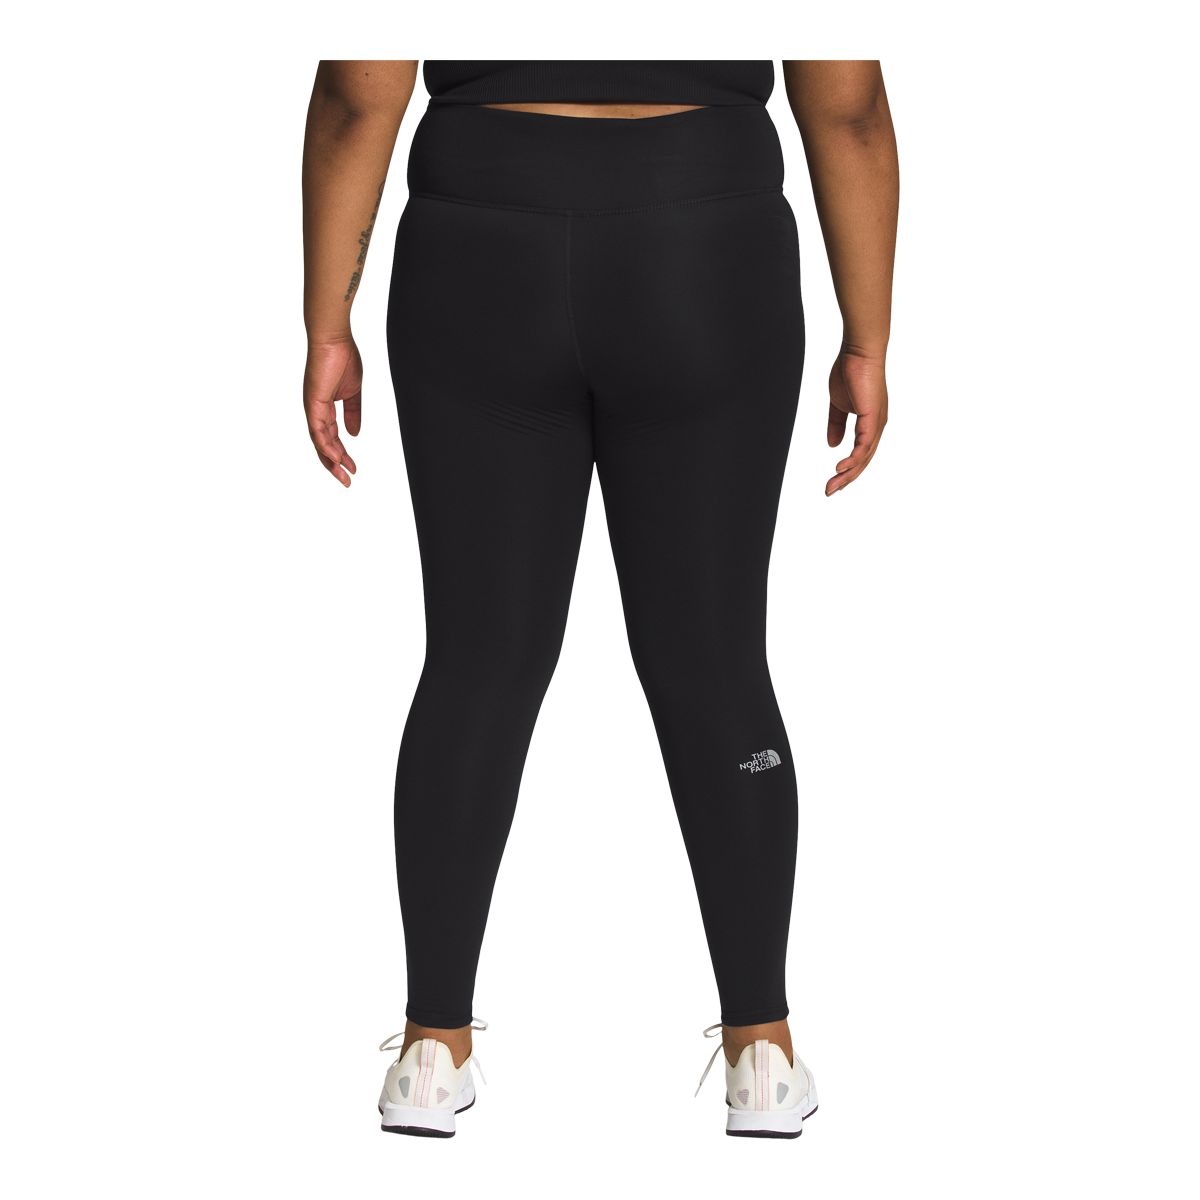 The North Face Singapore - Men's Expedition Tights Keep your lower half  dialed in the most extreme winter environments with heavyweight baselayer  tights that deliver an exceptional warmth-to-weight ratio. The anti-odor  fleece